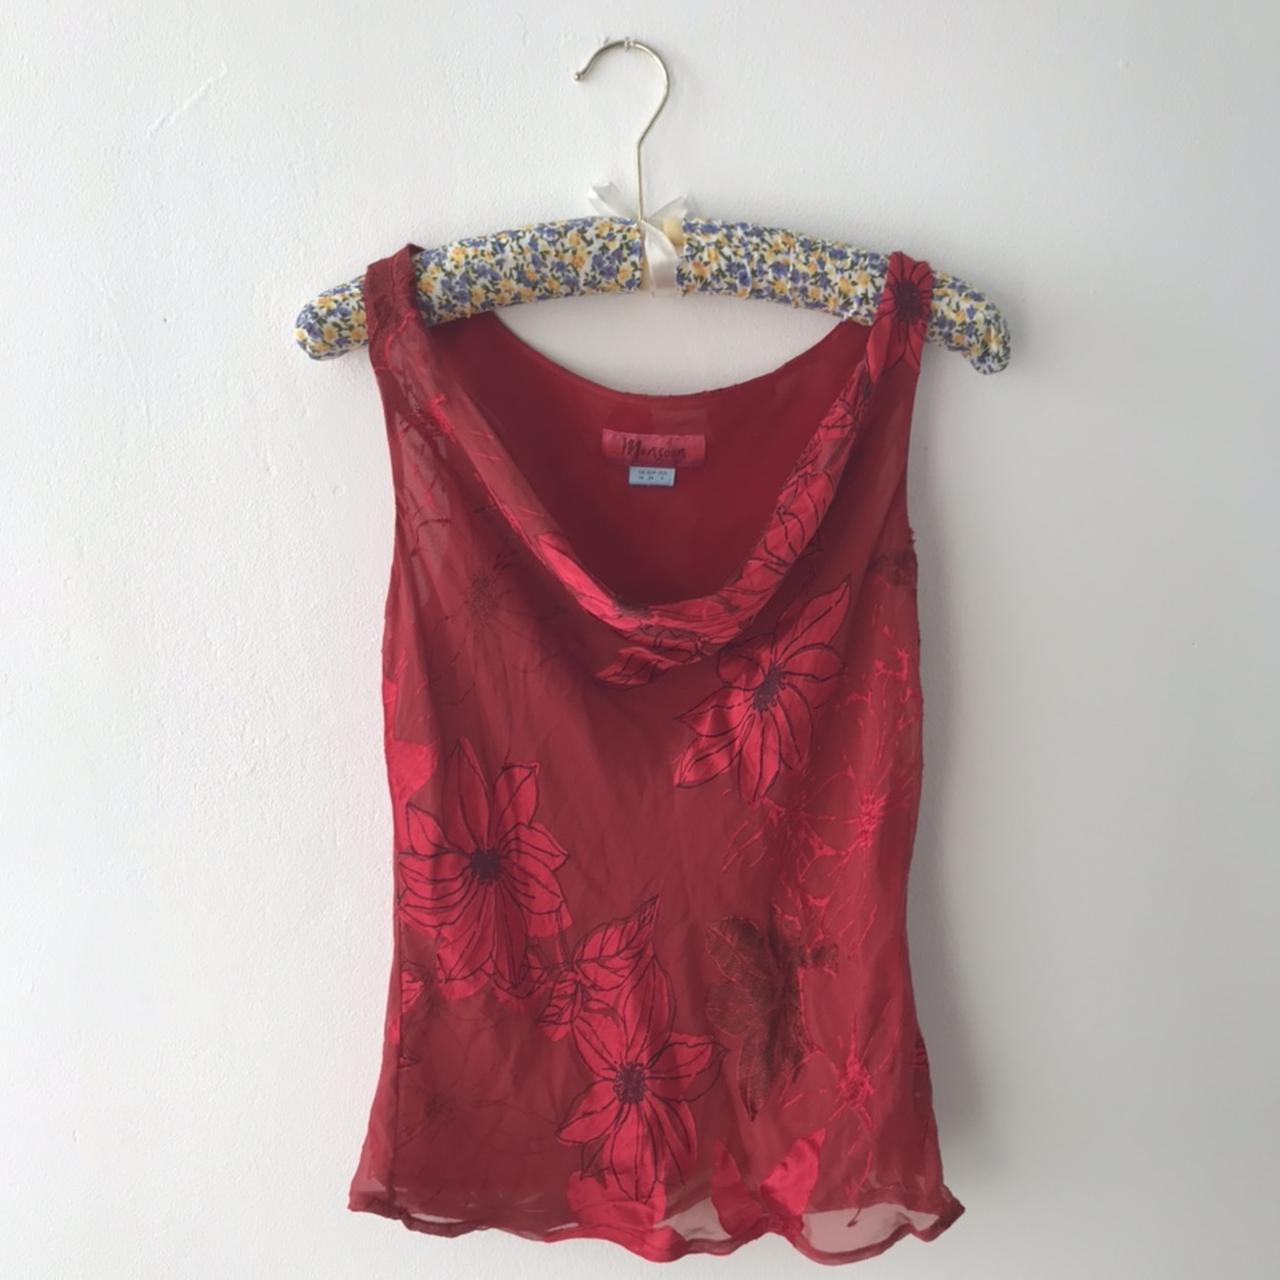 Gawjus red monsoon tank top - great for summer but... - Depop